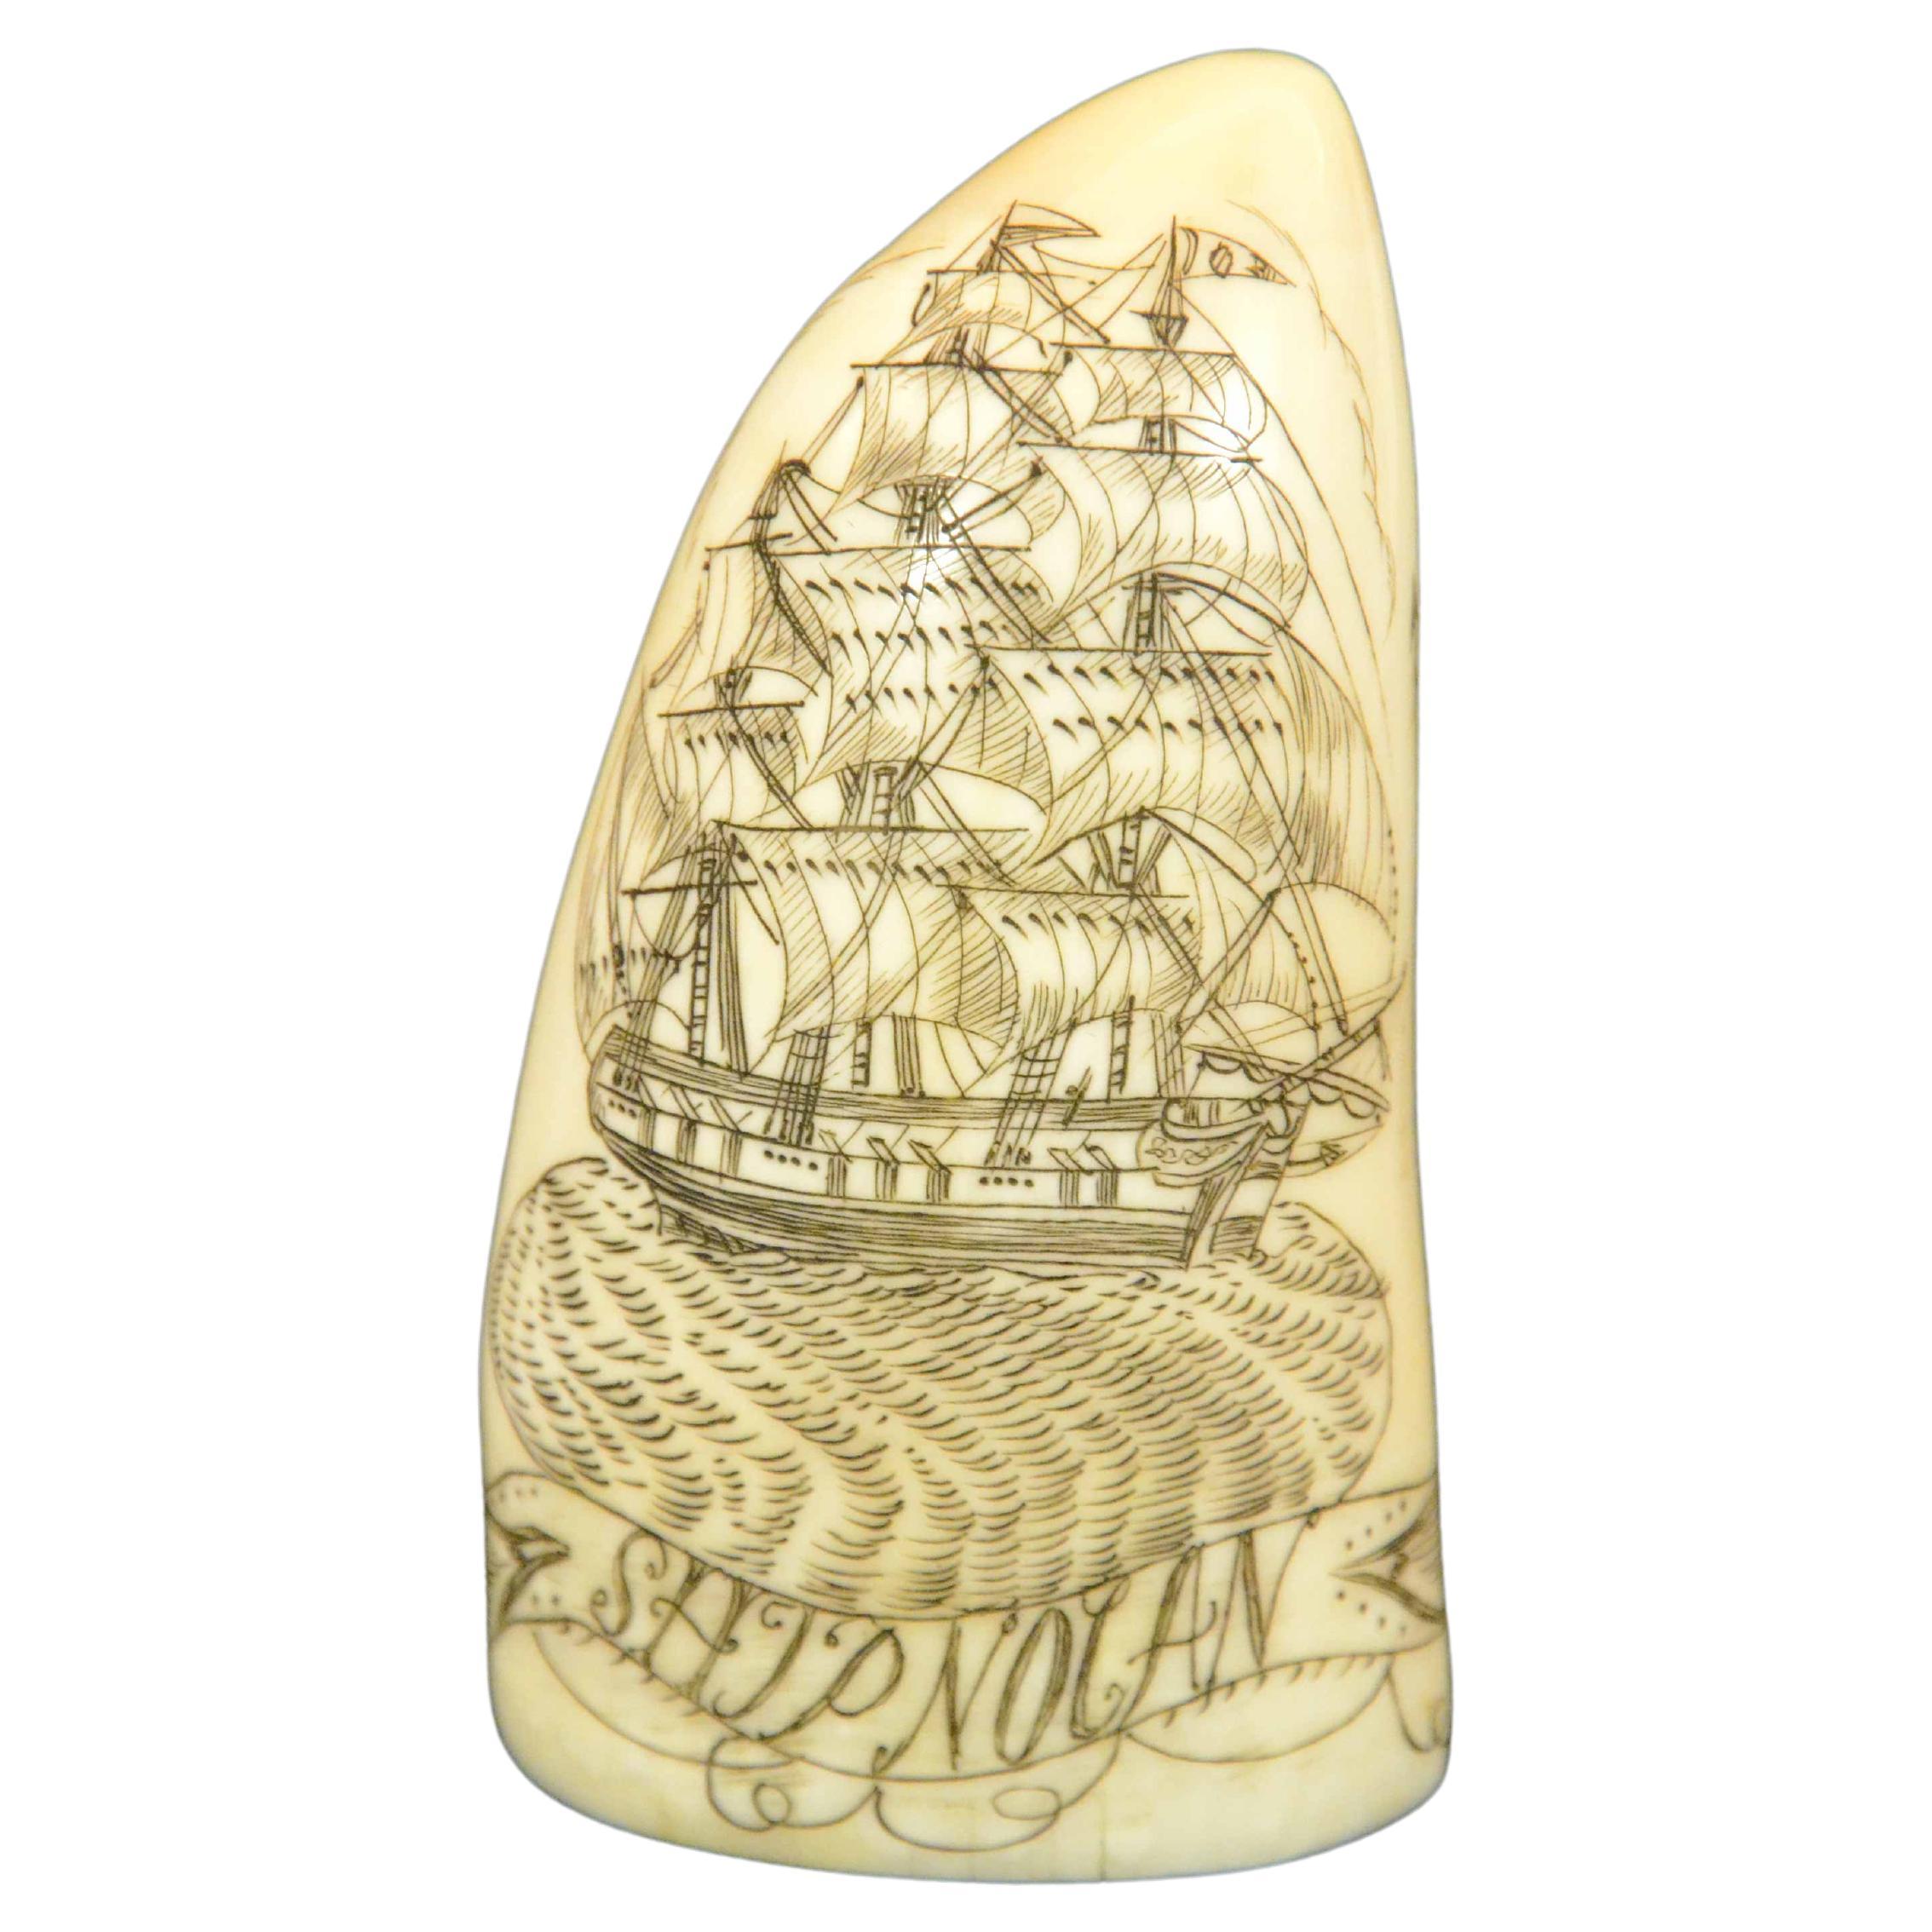 Scrimshaw of an engraved whale tooth dated 1861 depicting SHIP NOLAN